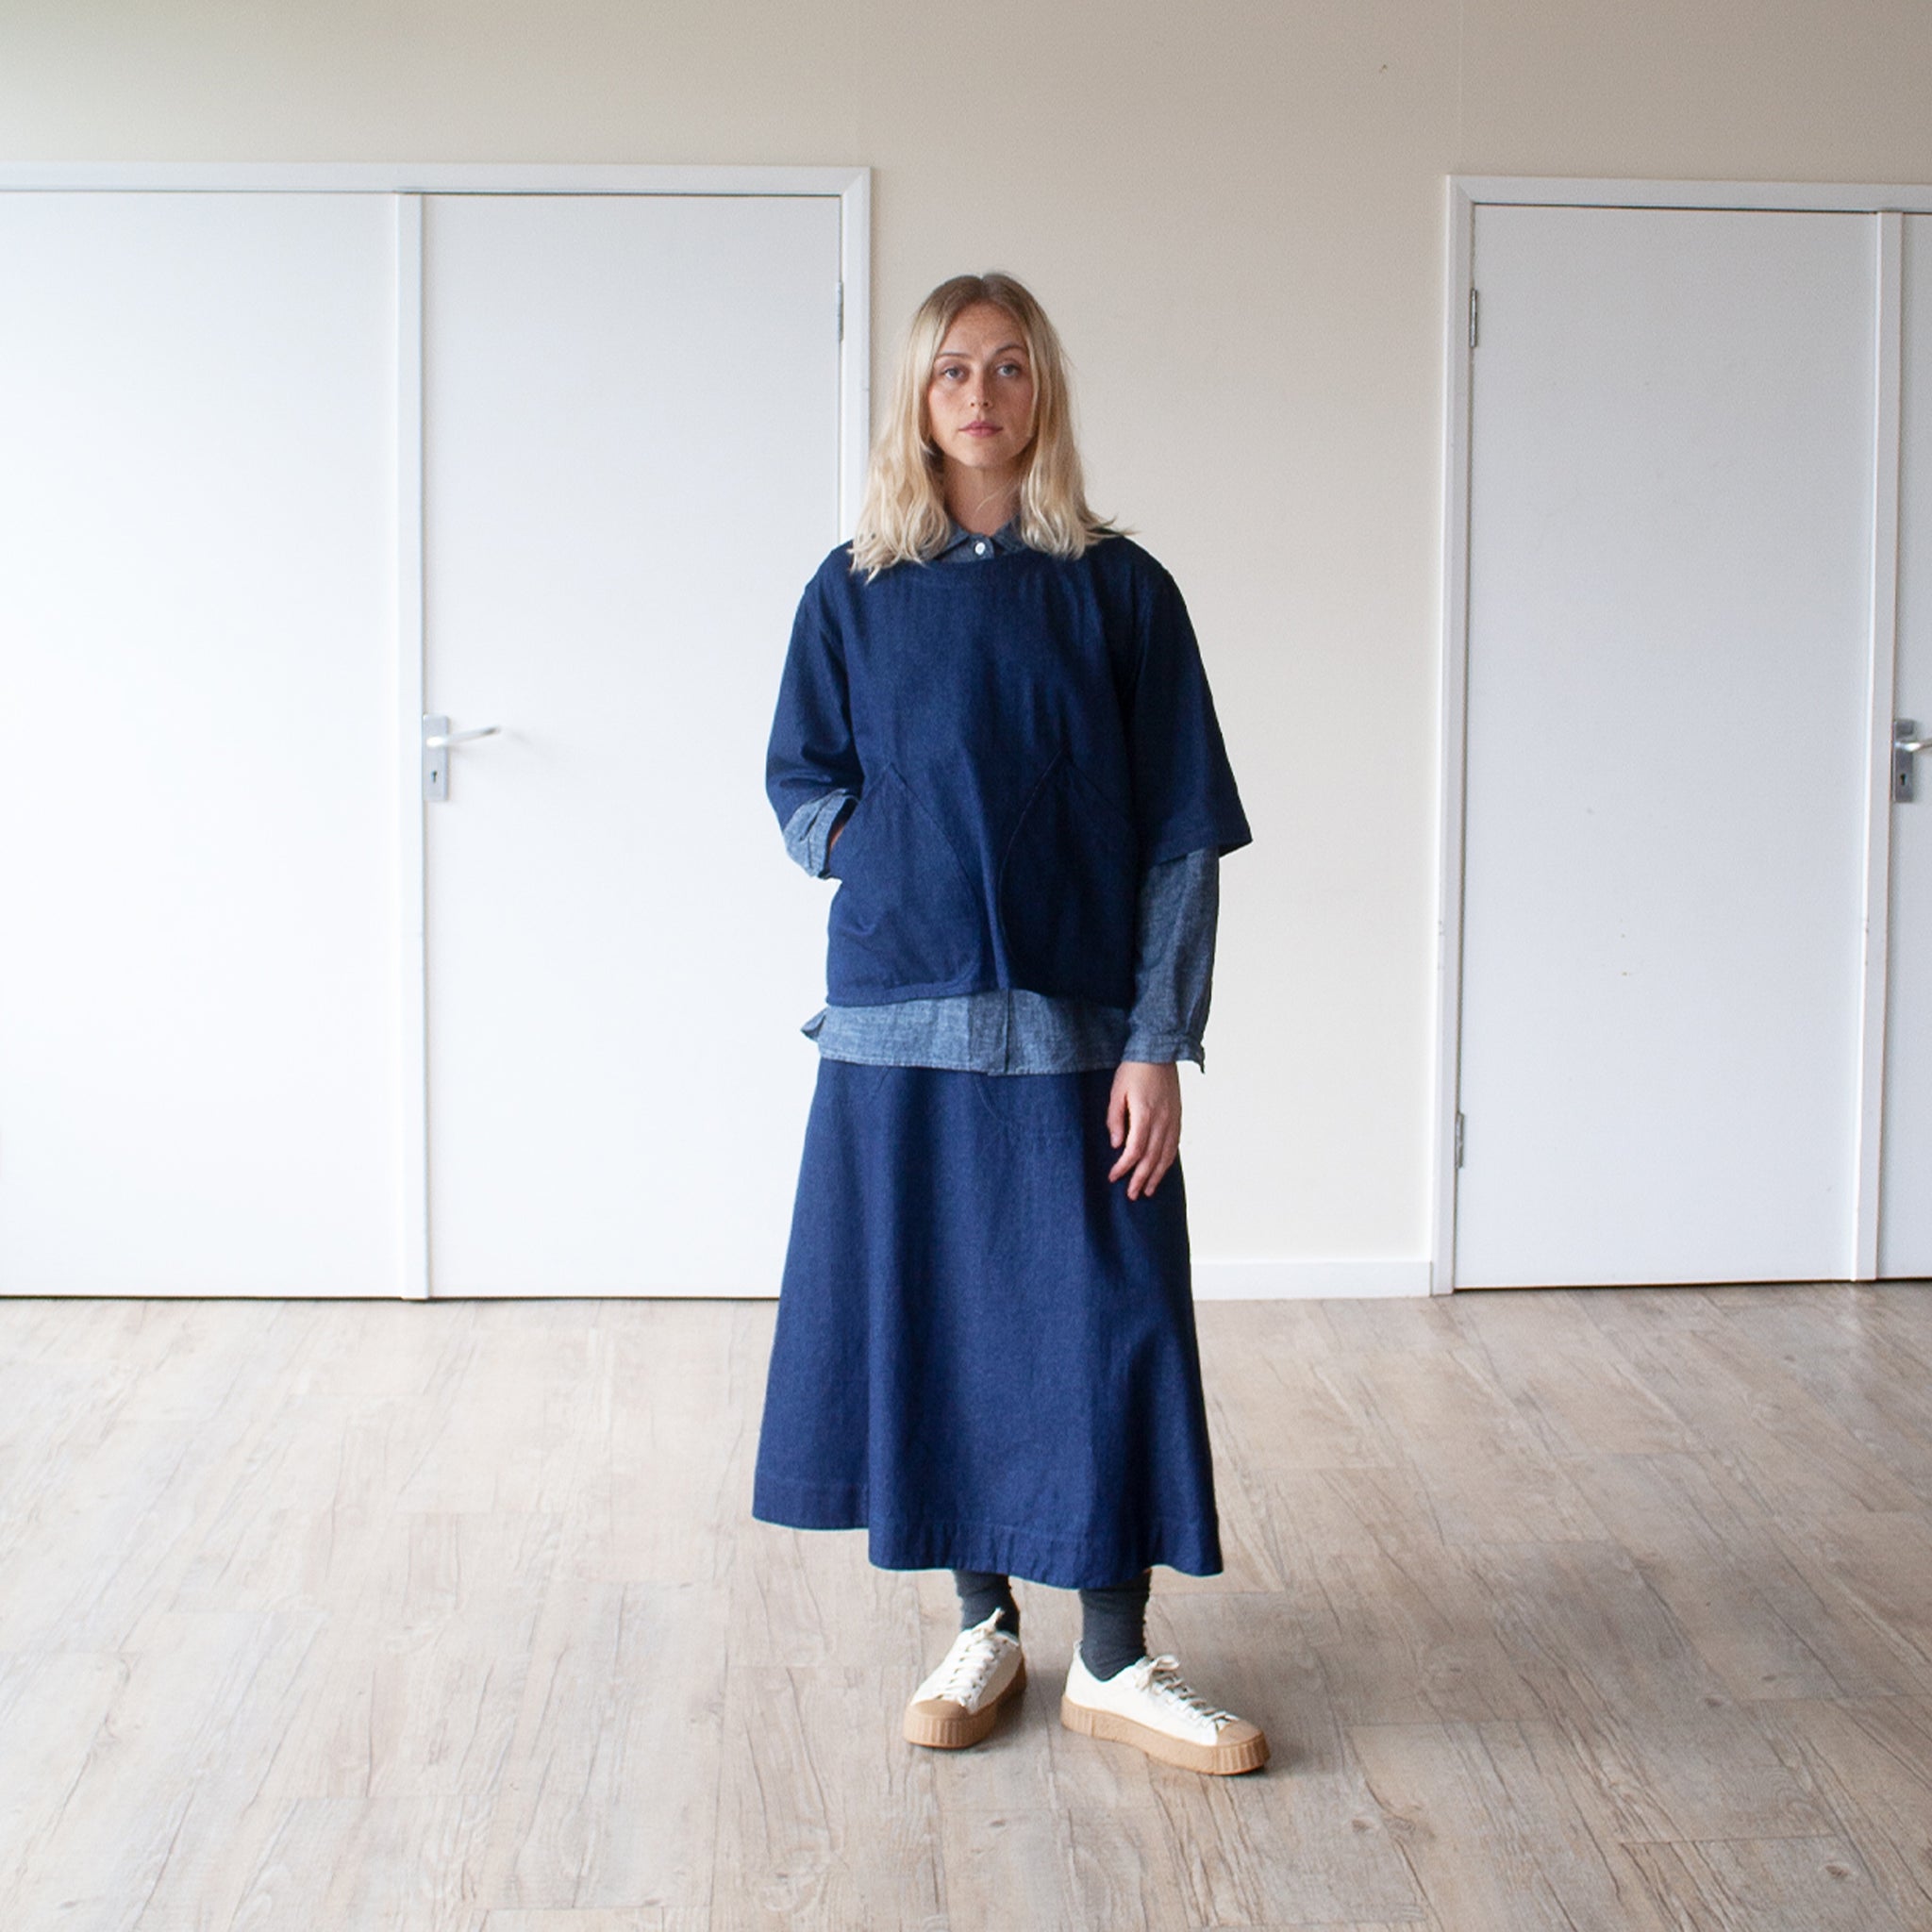 smiling blond woman standing in a sunlit room wearing an indigo denim overtop and skirt facing forward